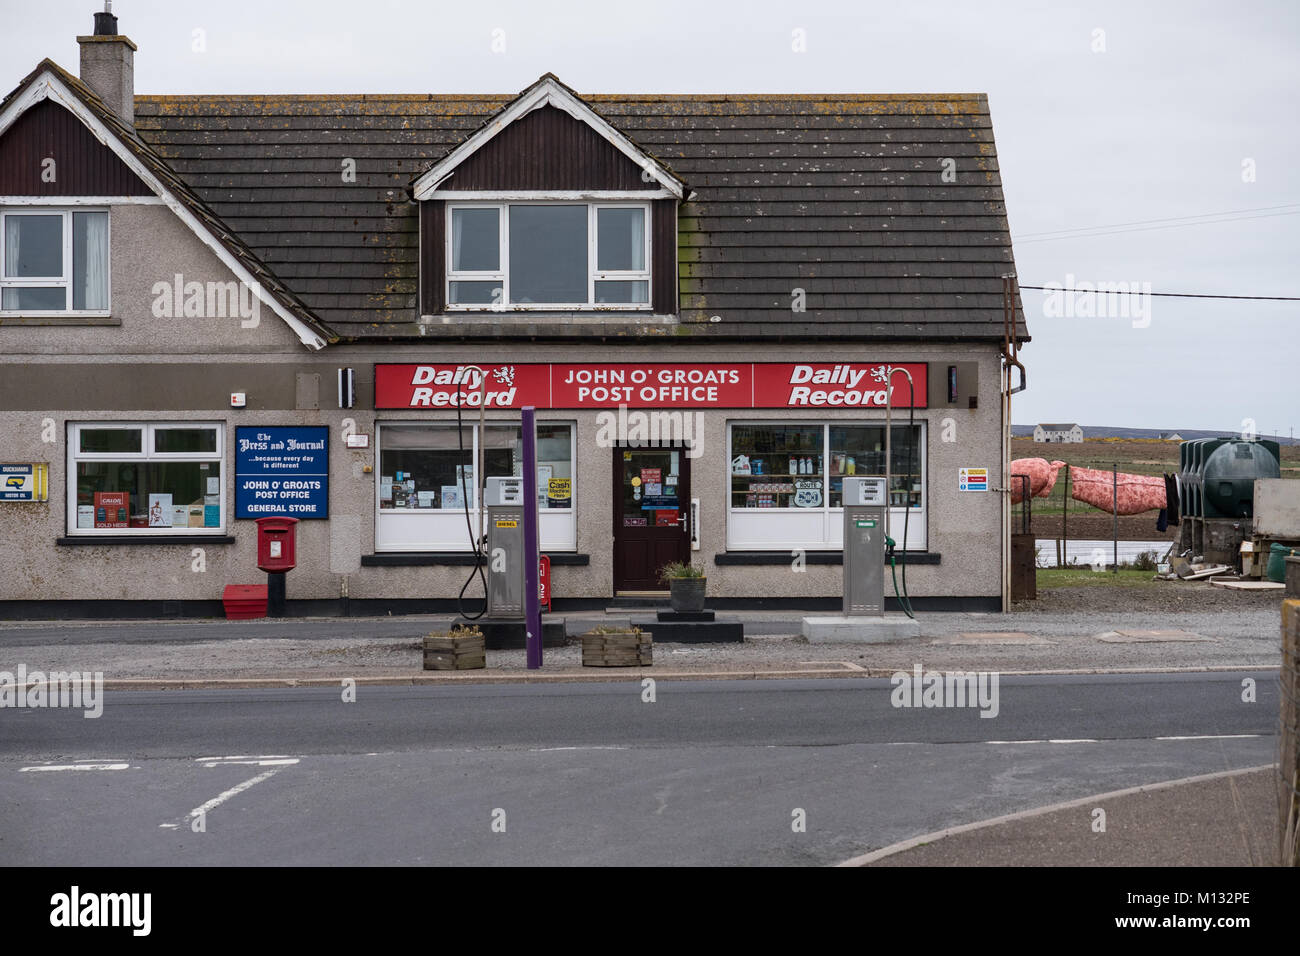 John O'Groats Post Office, filling station and General Stores, Caithness, Highlands, Scotland, UK. Stock Photo